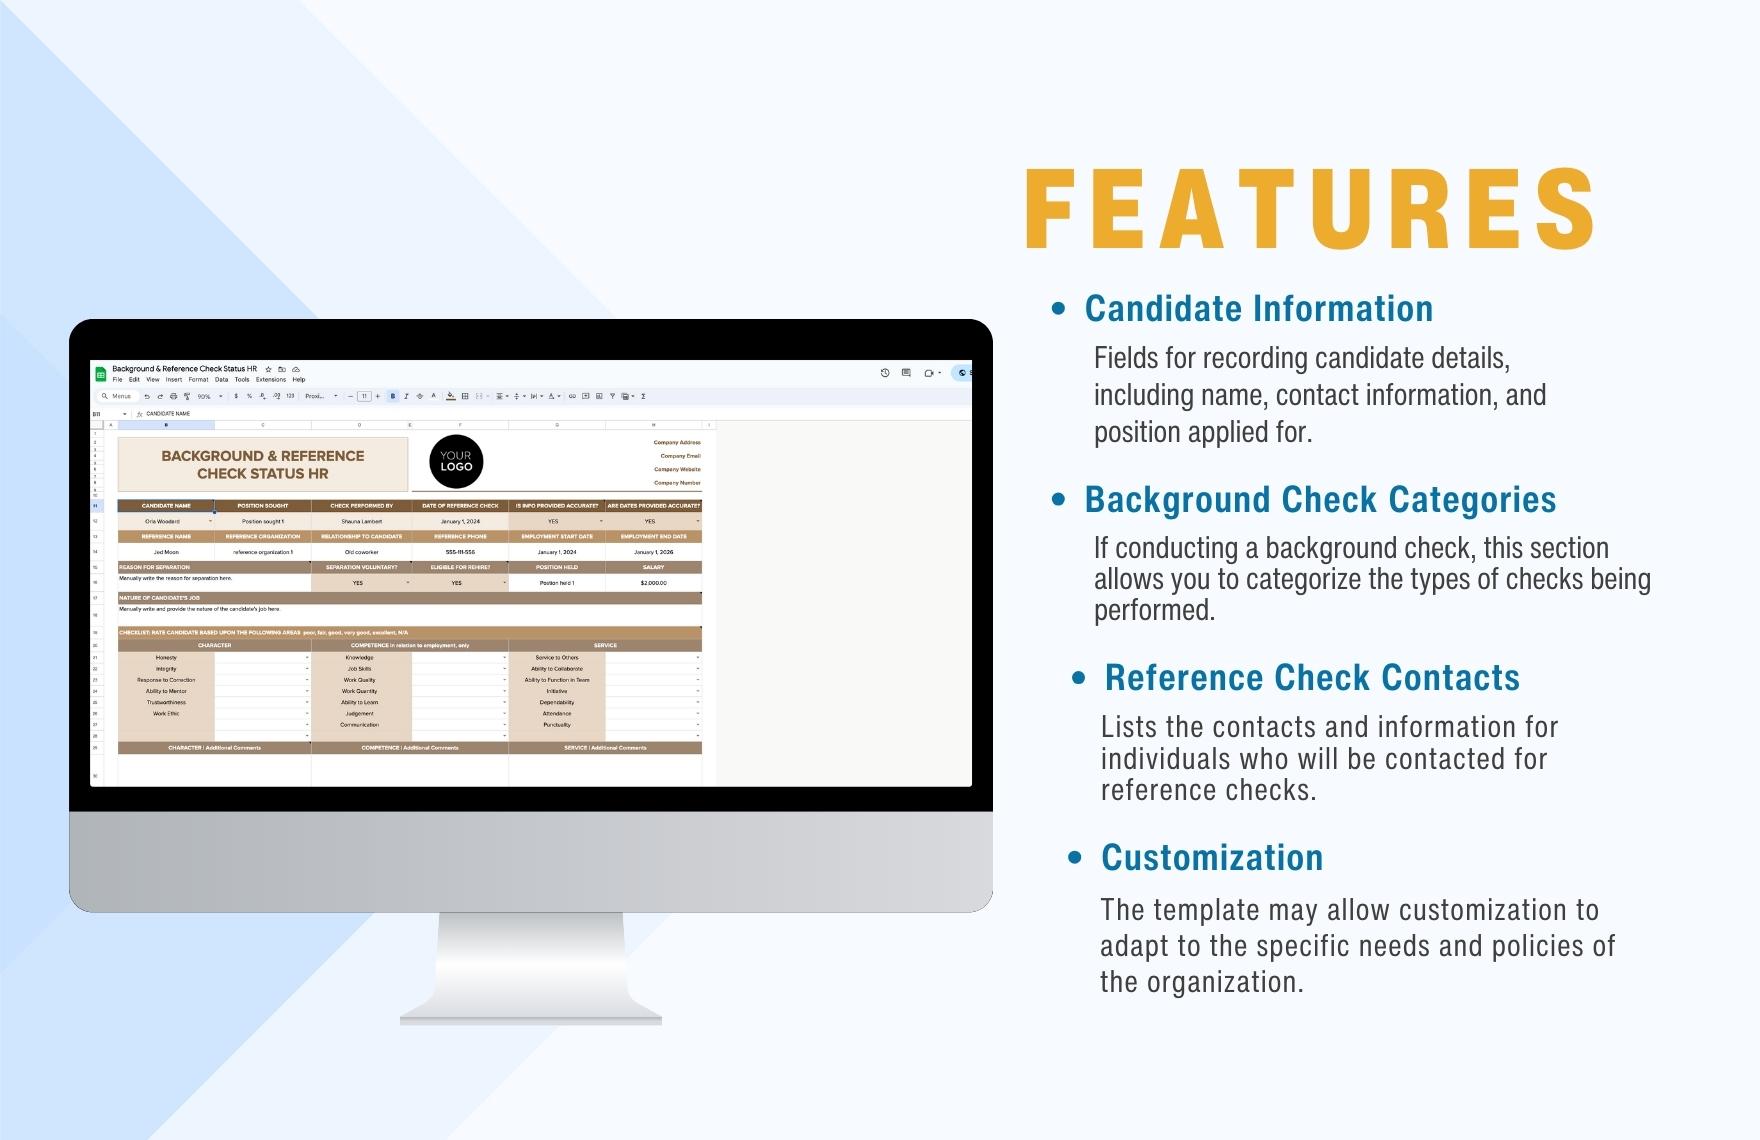 Background & Reference Check Status HR Template